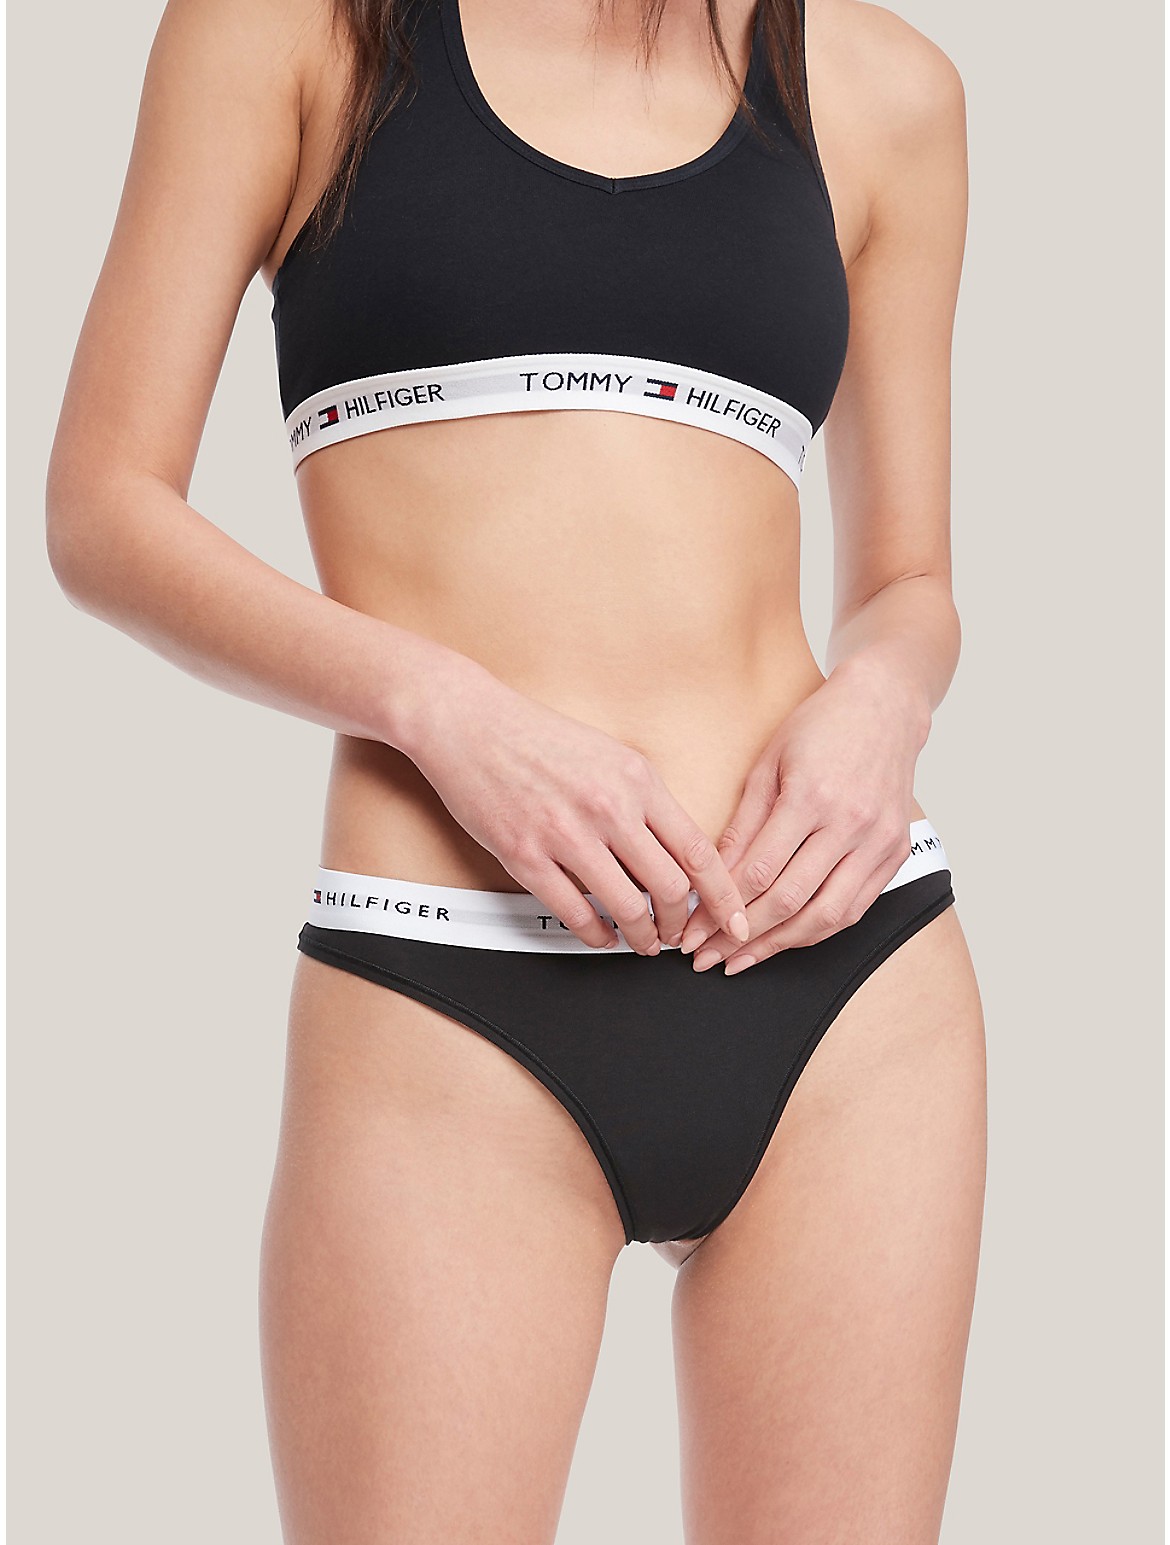 Tommy Hilfiger Signature Thong In Black